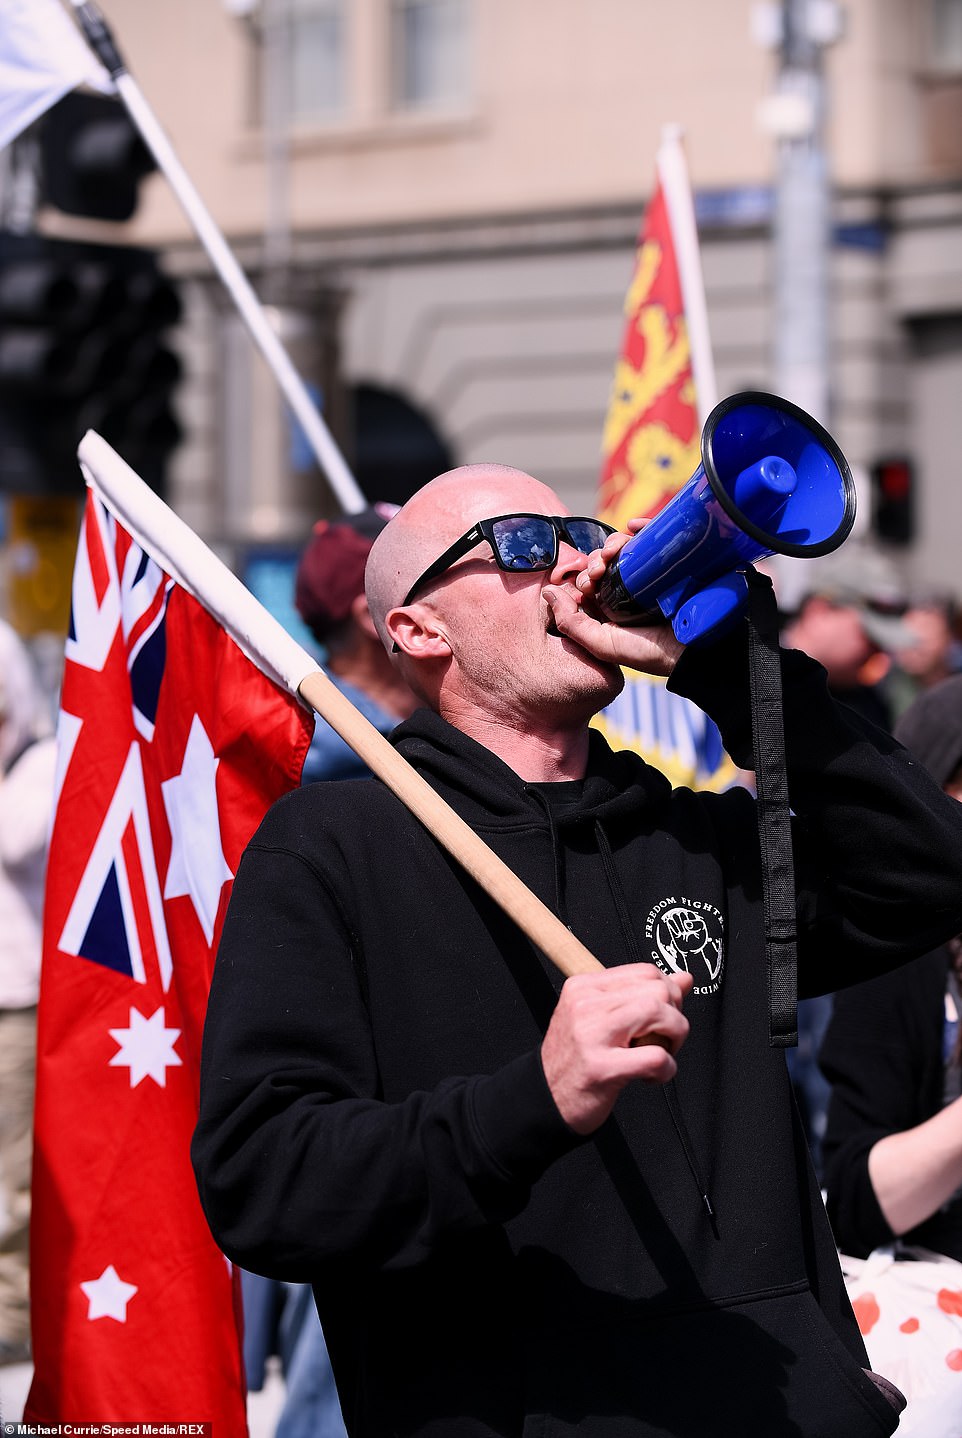 A demonstrator chants over the megaphone as the protesters march in Melbourne on Saturday